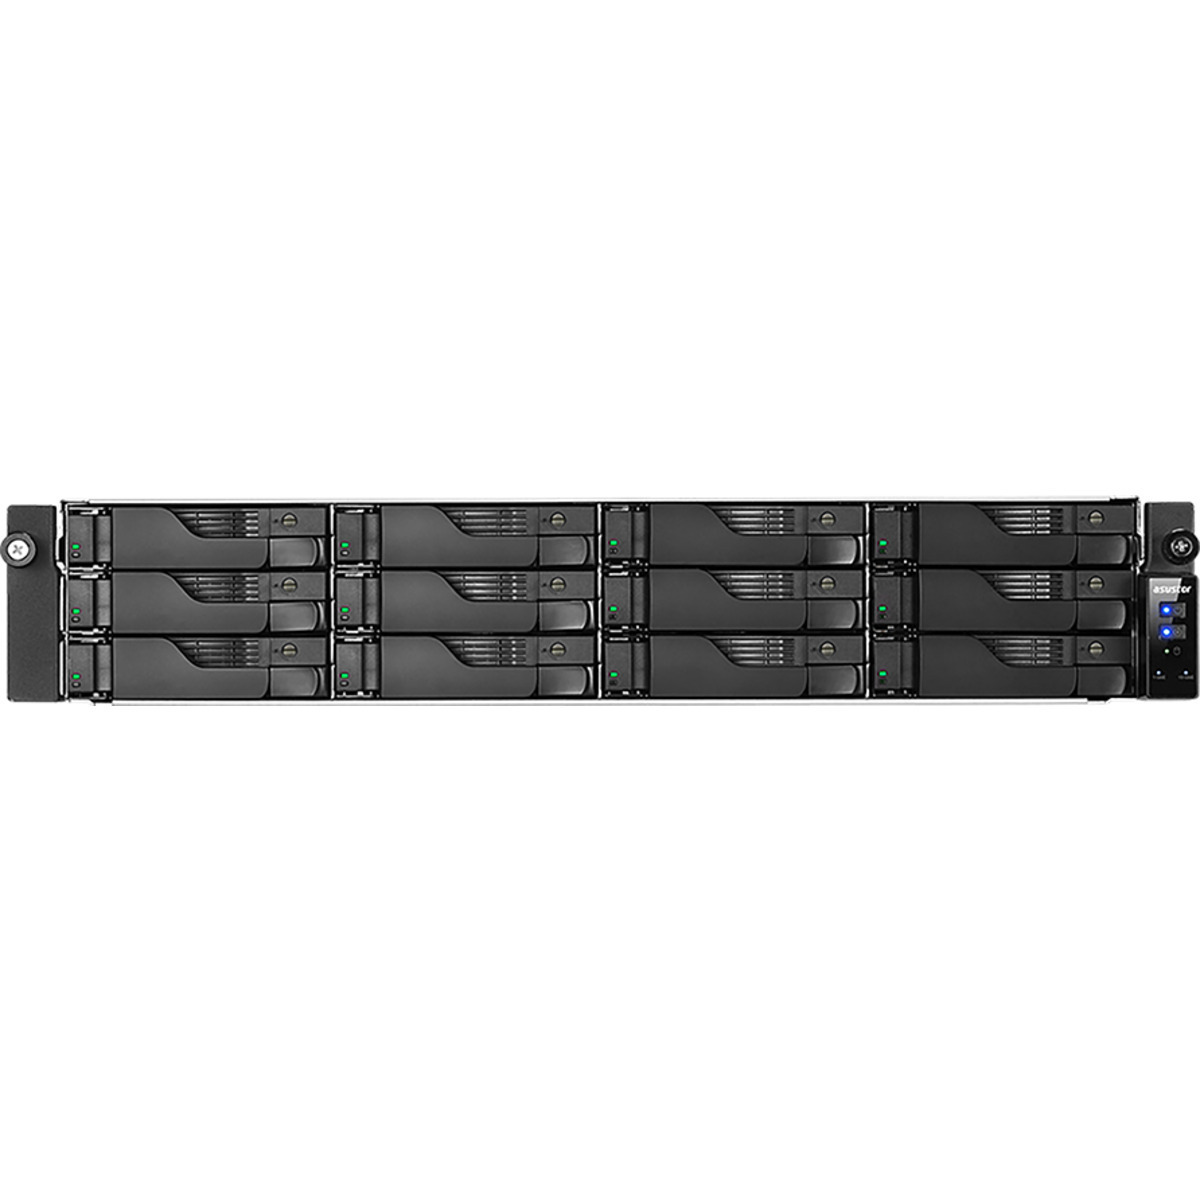 ASUSTOR LOCKERSTOR 12RD AS6512RD 192tb 12-Bay RackMount Multimedia / Power User / Business NAS - Network Attached Storage Device 8x24tb Western Digital Ultrastar HC580 SED WUH722424ALE6L1 3.5 7200rpm SATA 6Gb/s HDD ENTERPRISE Class Drives Installed - Burn-In Tested - FREE RAM UPGRADE LOCKERSTOR 12RD AS6512RD